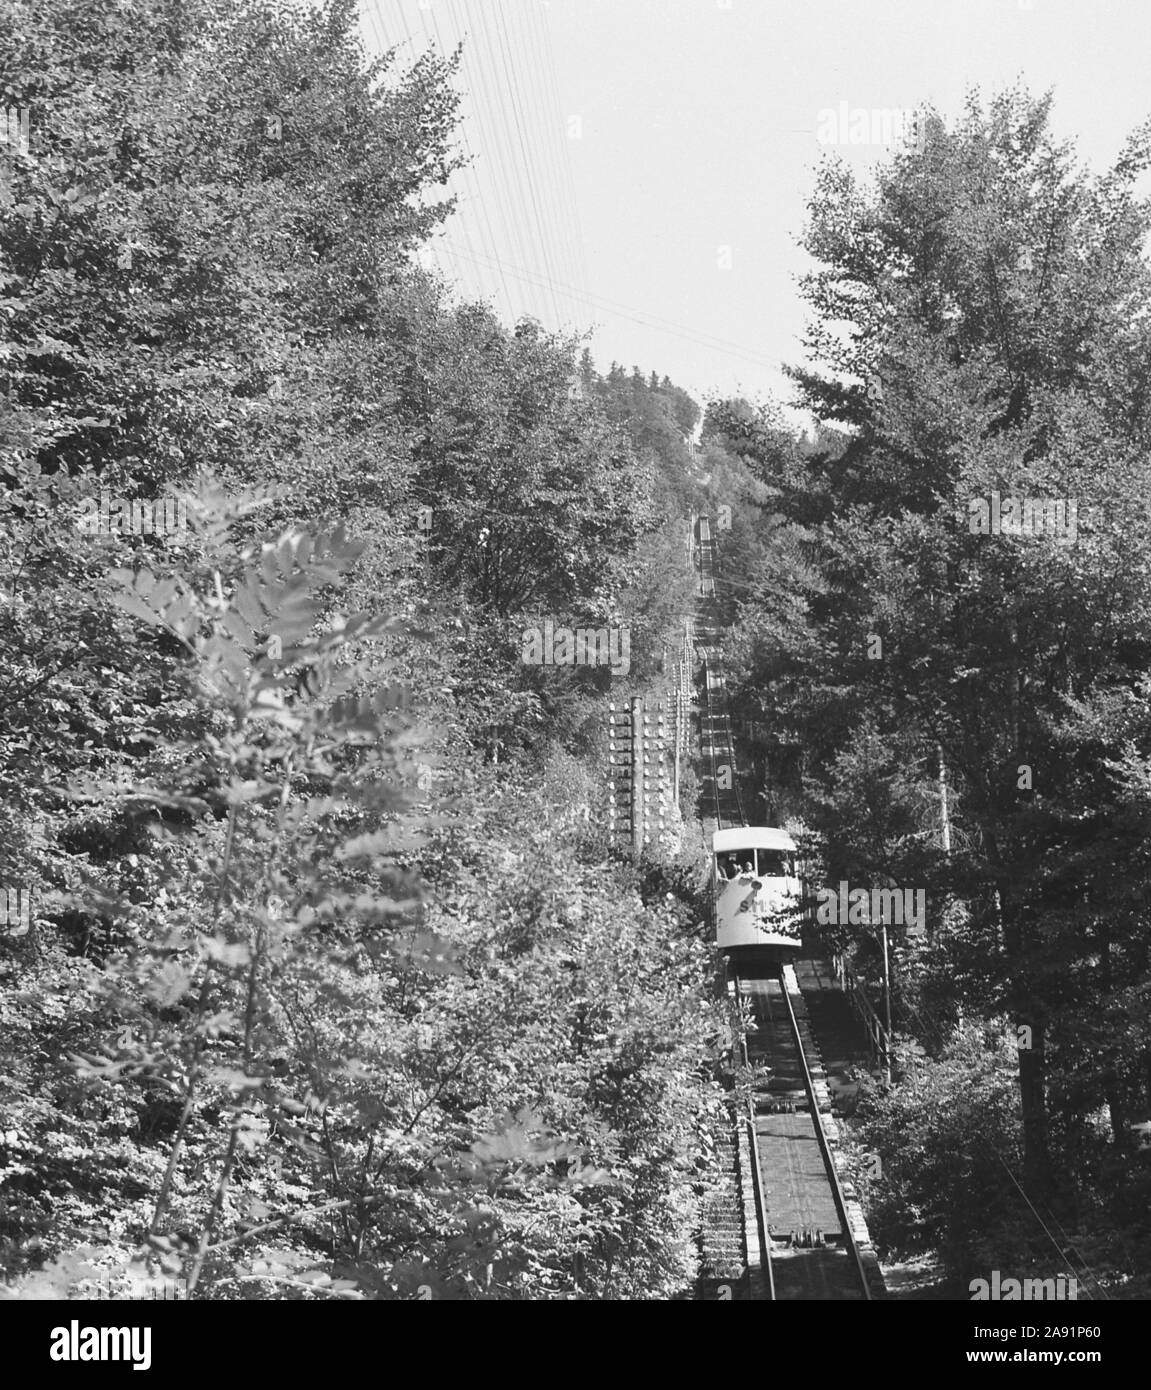 1950s, historical, a swiss mountain funicular railway train or carriage with the letters SMS on the front, descending from the top of Mont-Soleil, a peak of the Jura Mountains to the town of Saint Imier, Bern, Switzerland, a journey which was established in 1903. A funicular railway is form of cable railway on a steep slope where two carriages are attached to opposite ends of a haulage cable. Stock Photo